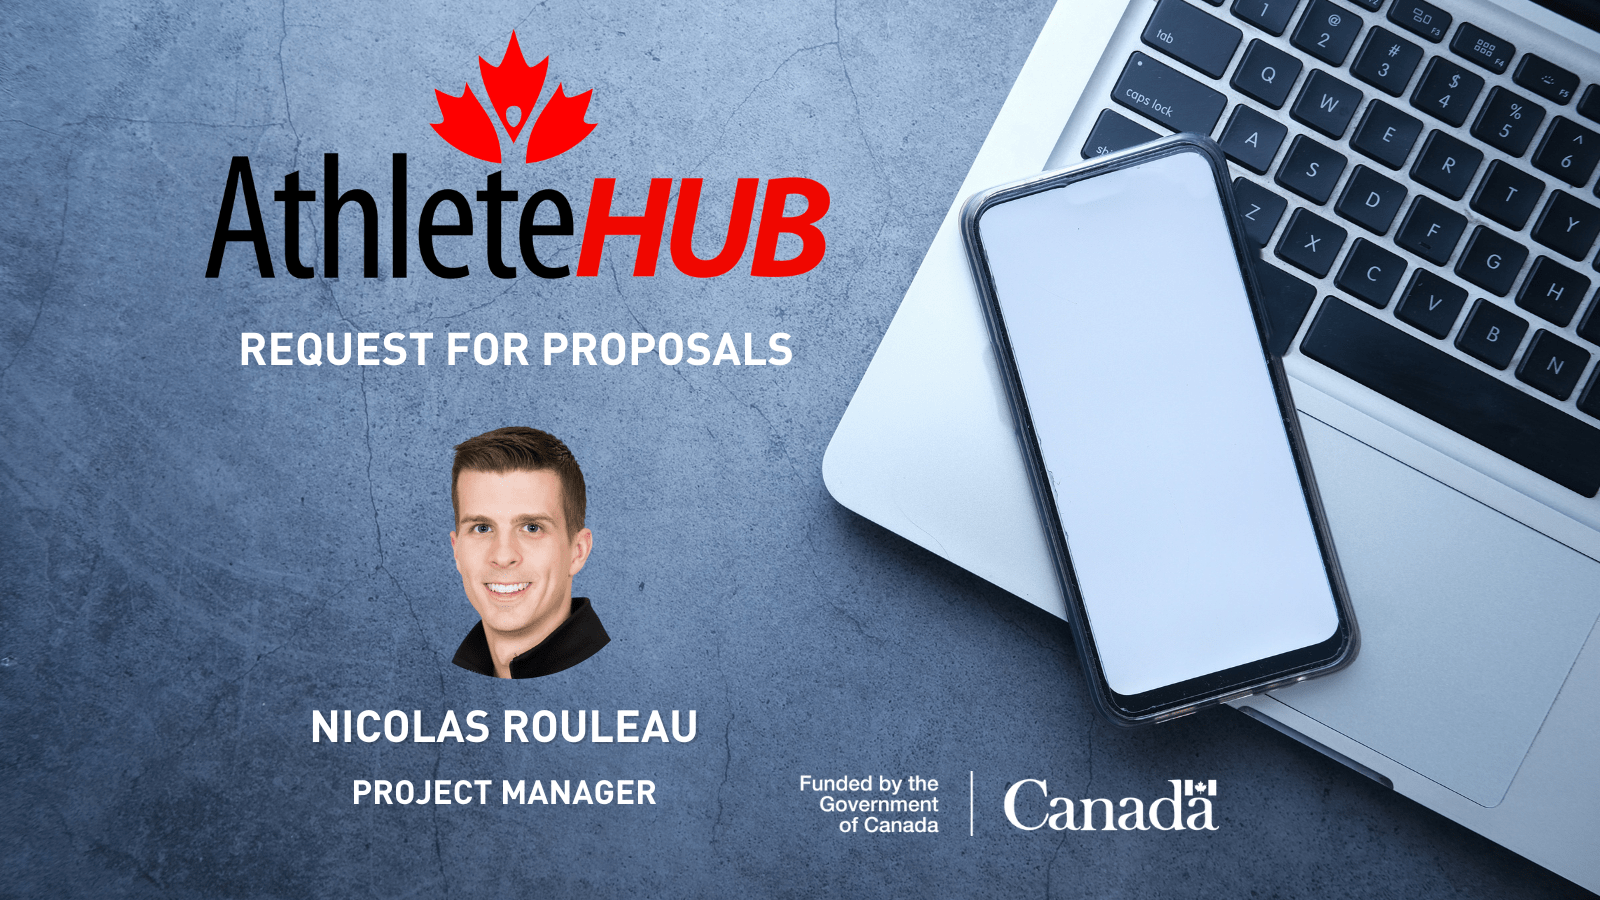 Athlete Hub Request for Proposals - Project Manager Nicolas Rouleau